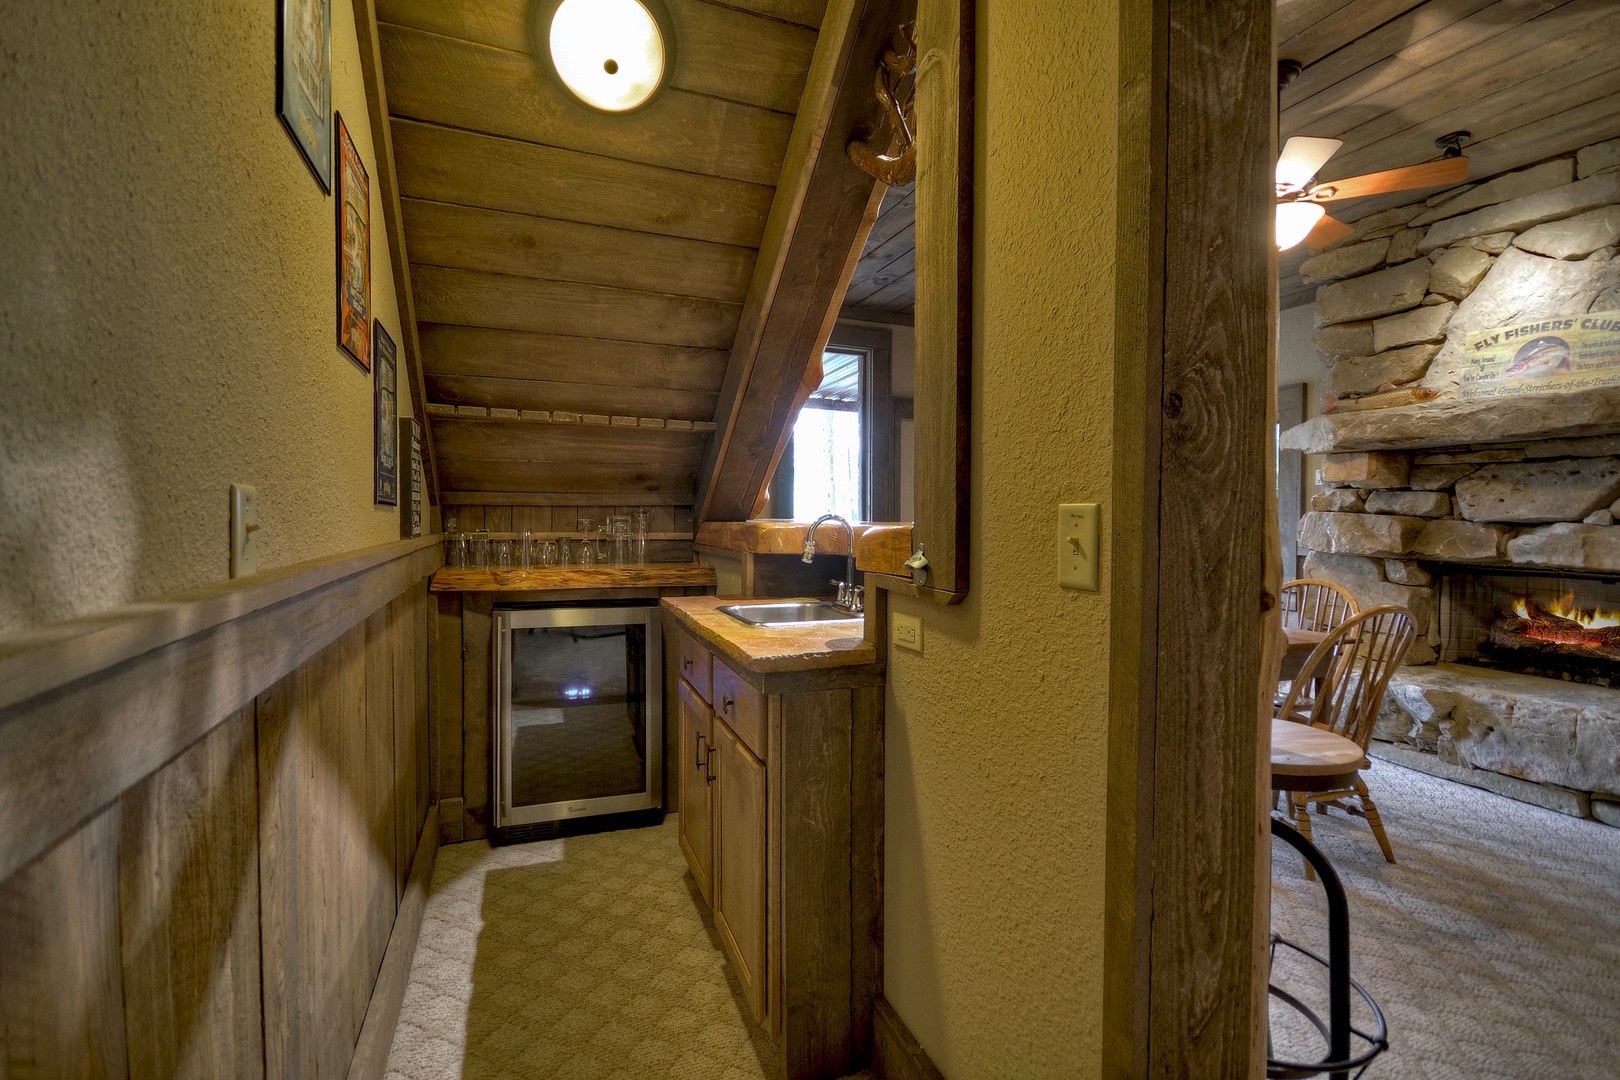 Reel Creek Lodge- Lower level wine chiller with cabinet storage and sink area